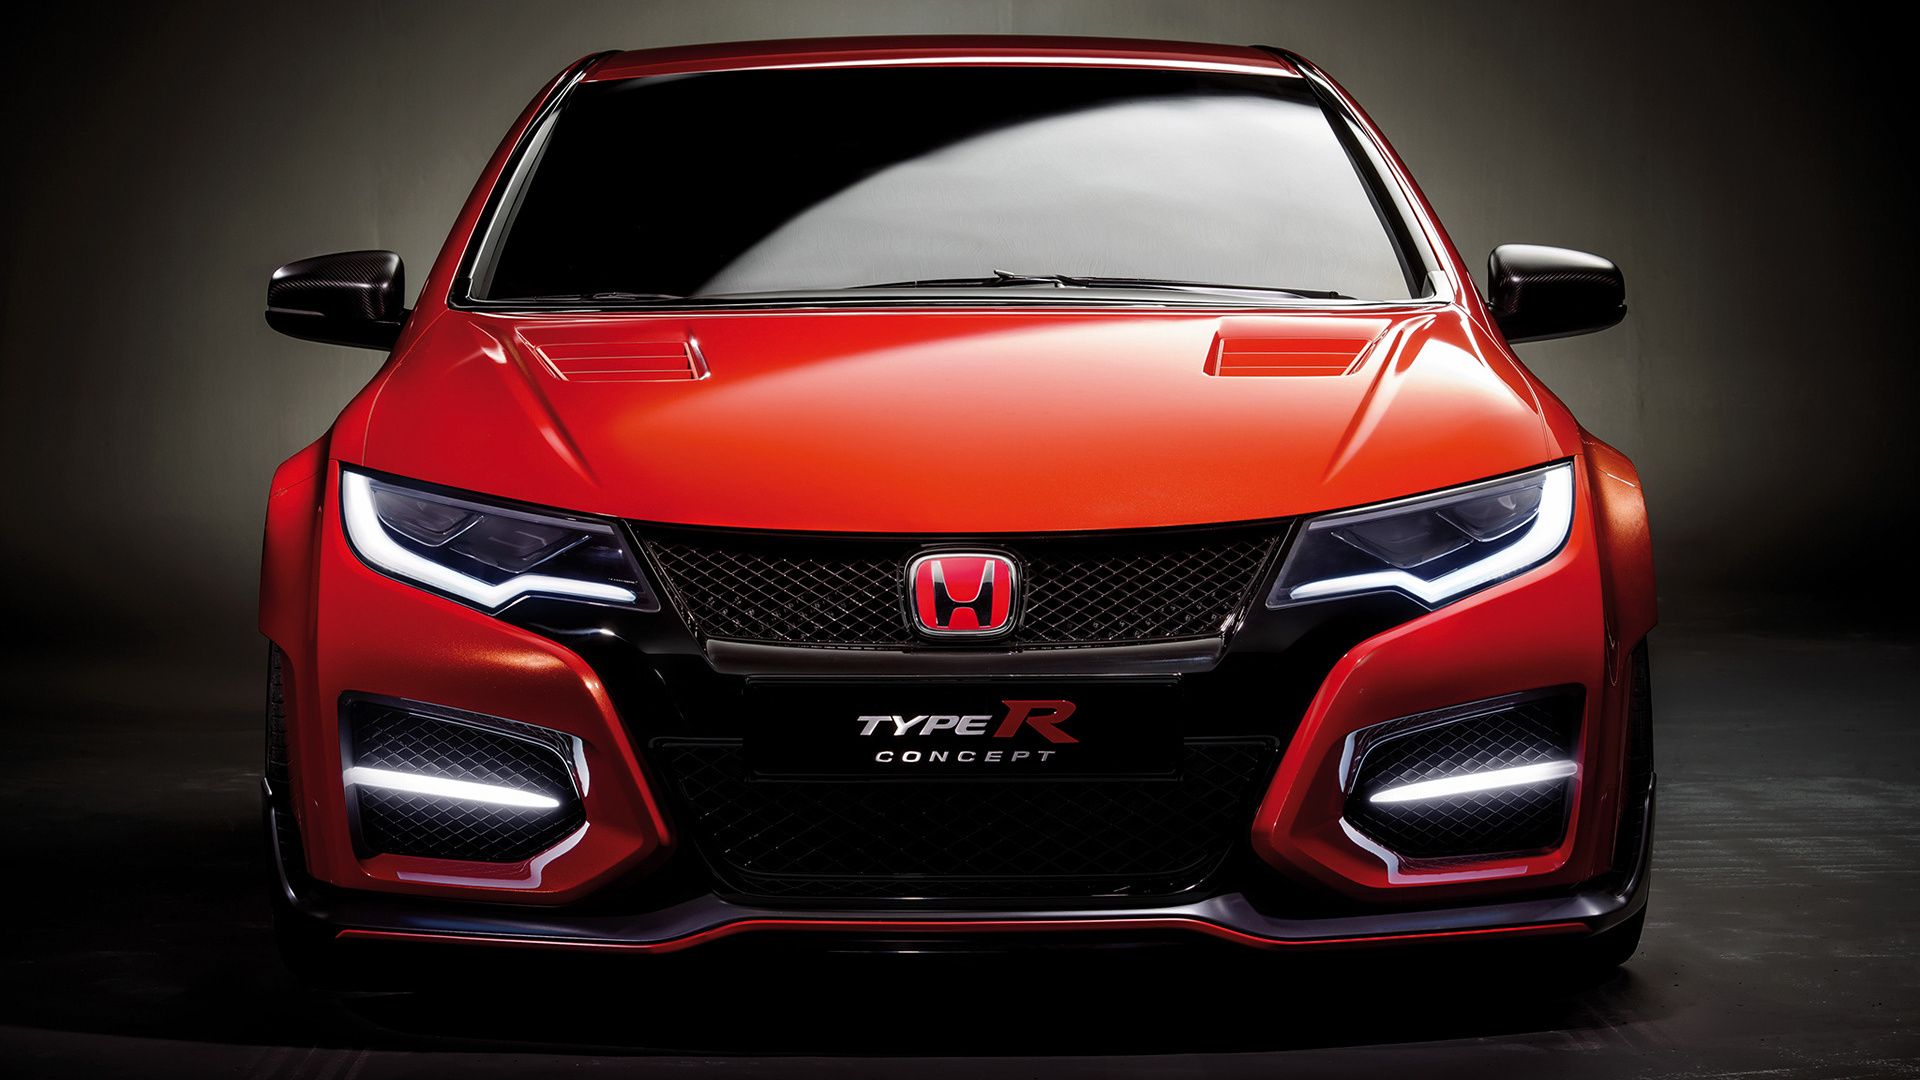 Honda Civic Type R Concept and HD Image